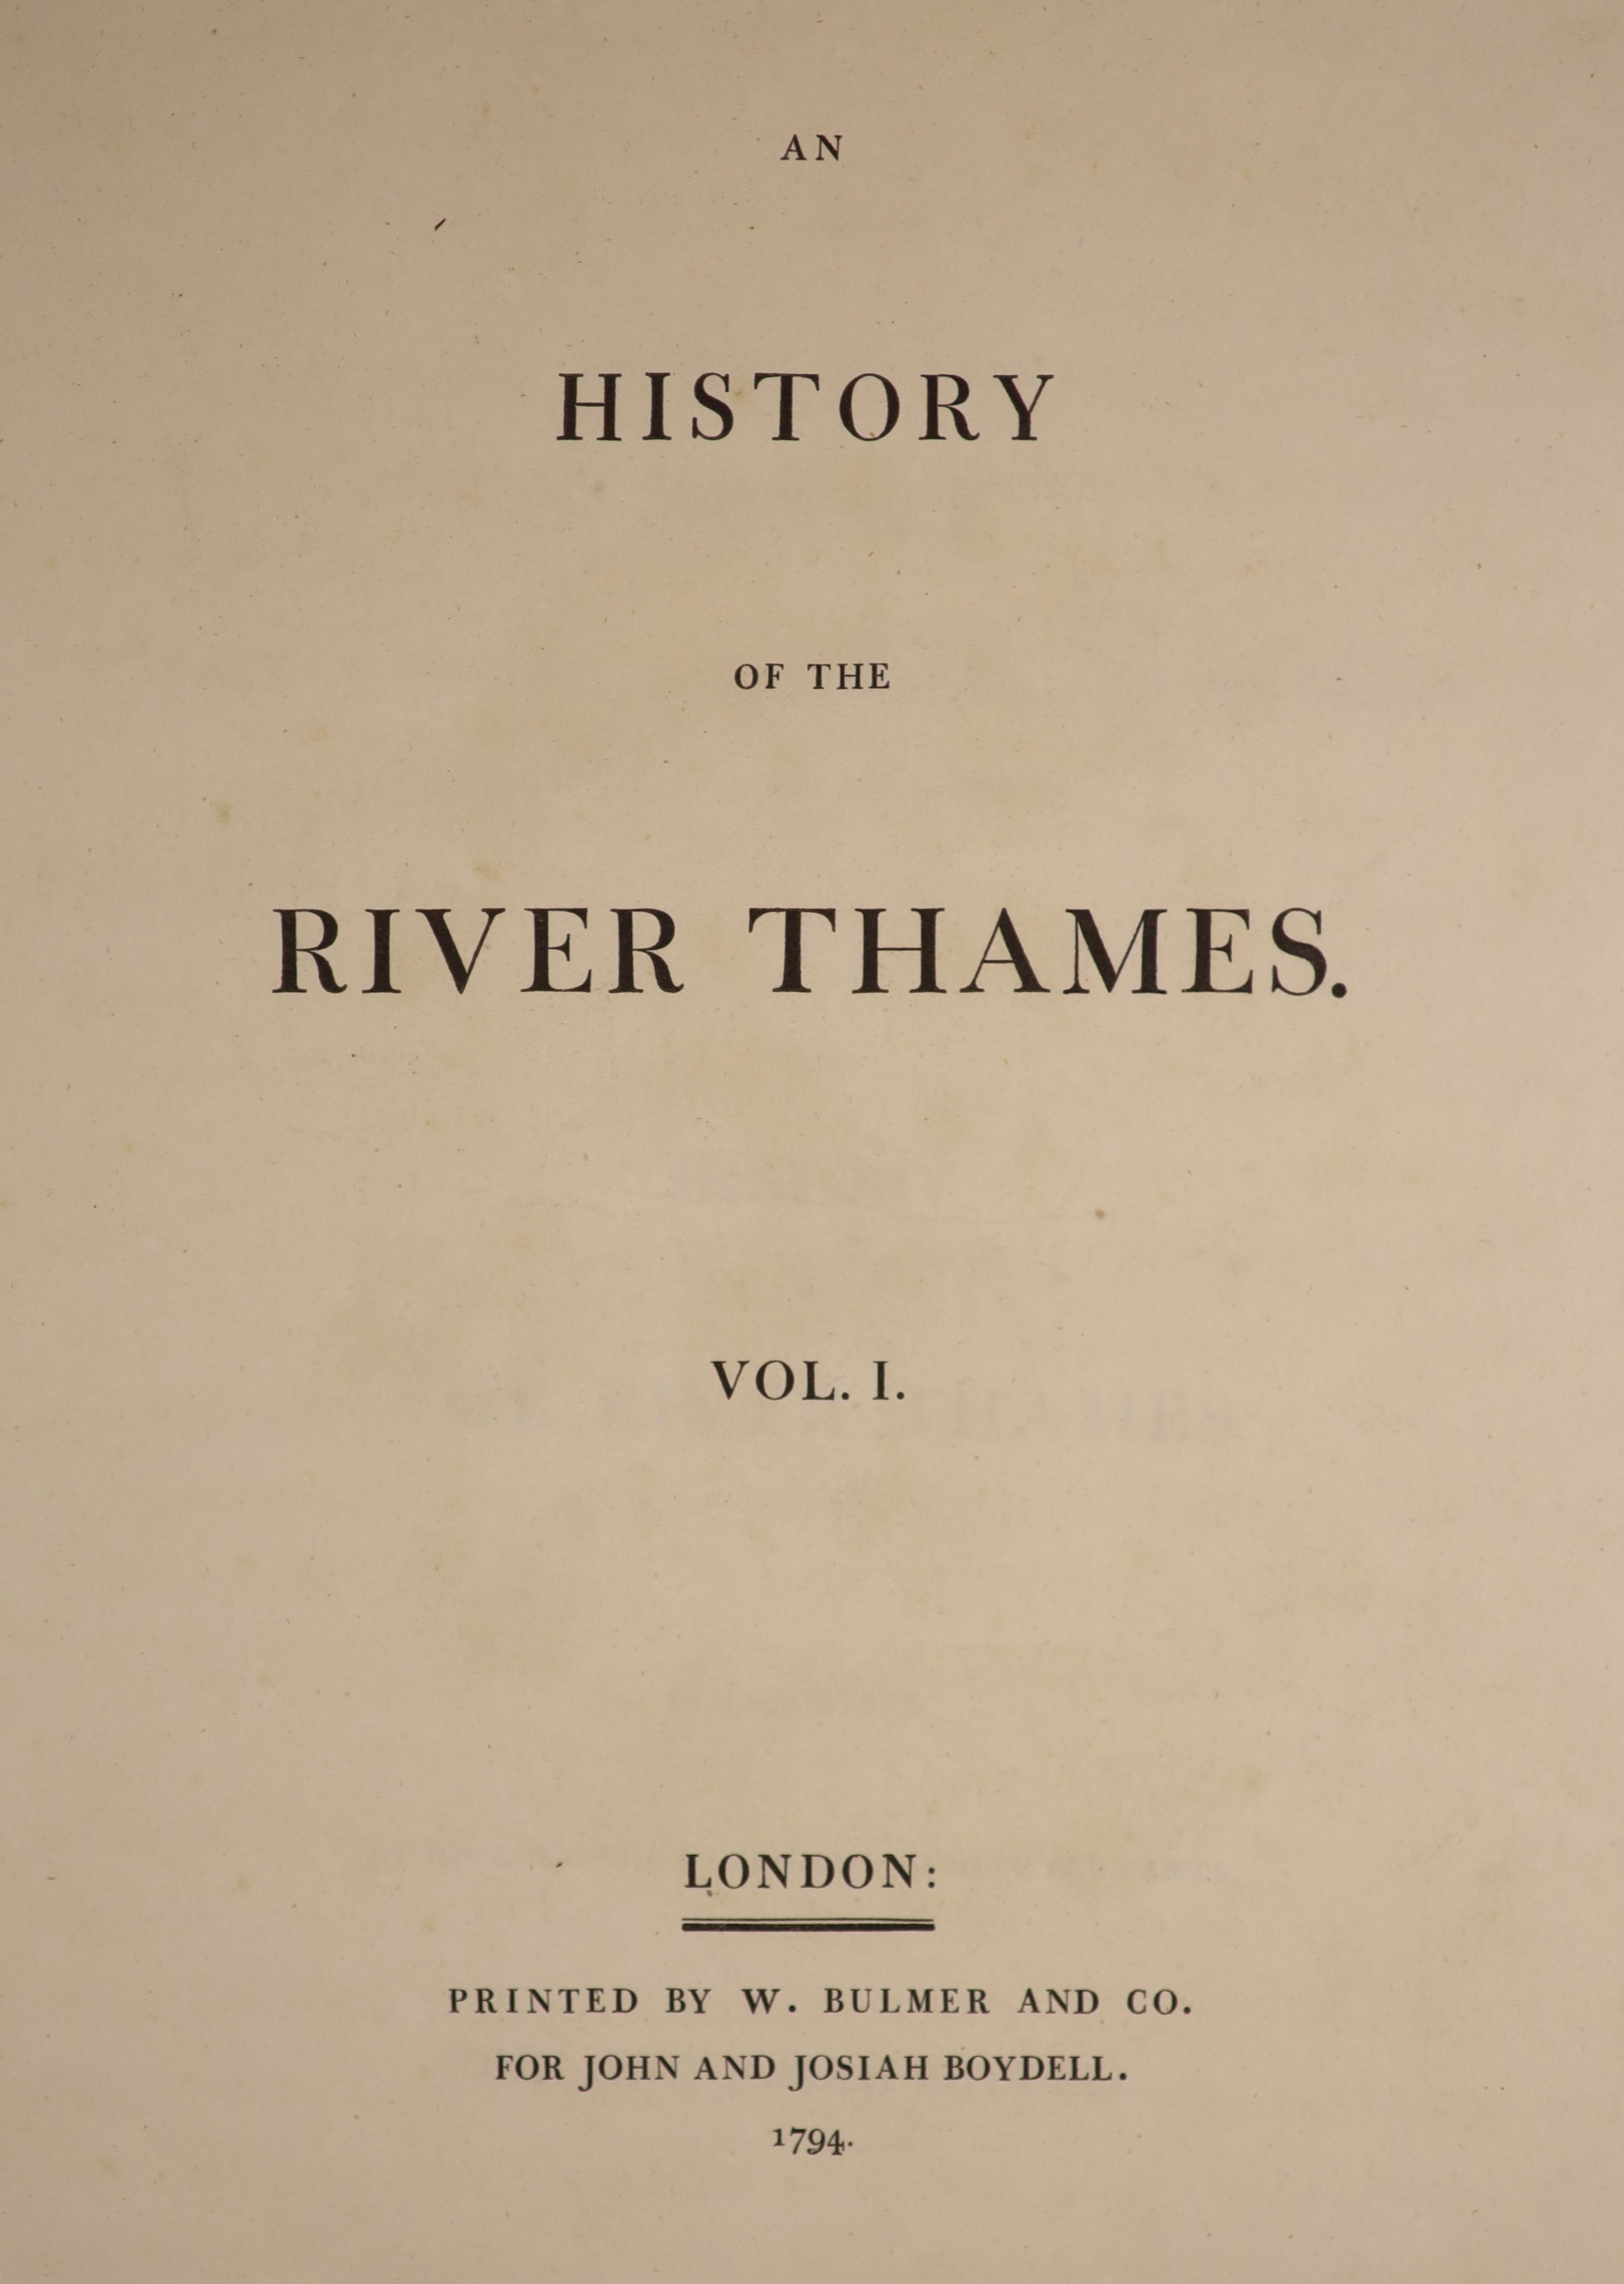 ° Boydell, James - Boydell, Josiah - An History of the River Thames, first edition, folio, 2 vols in - Image 2 of 5